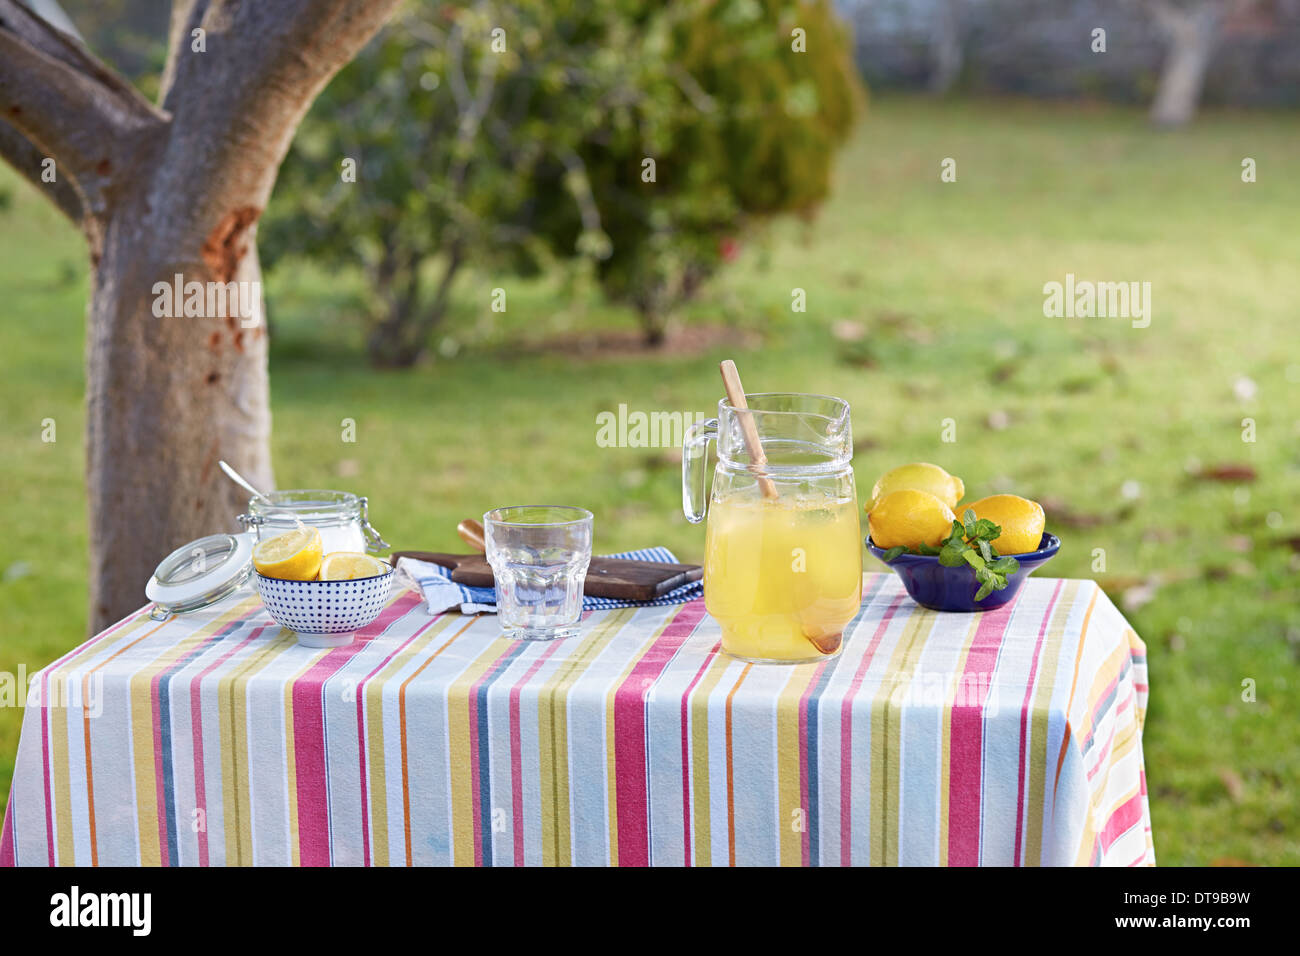 Preparing homemade lemonade in garden table with stripped cloth Stock Photo